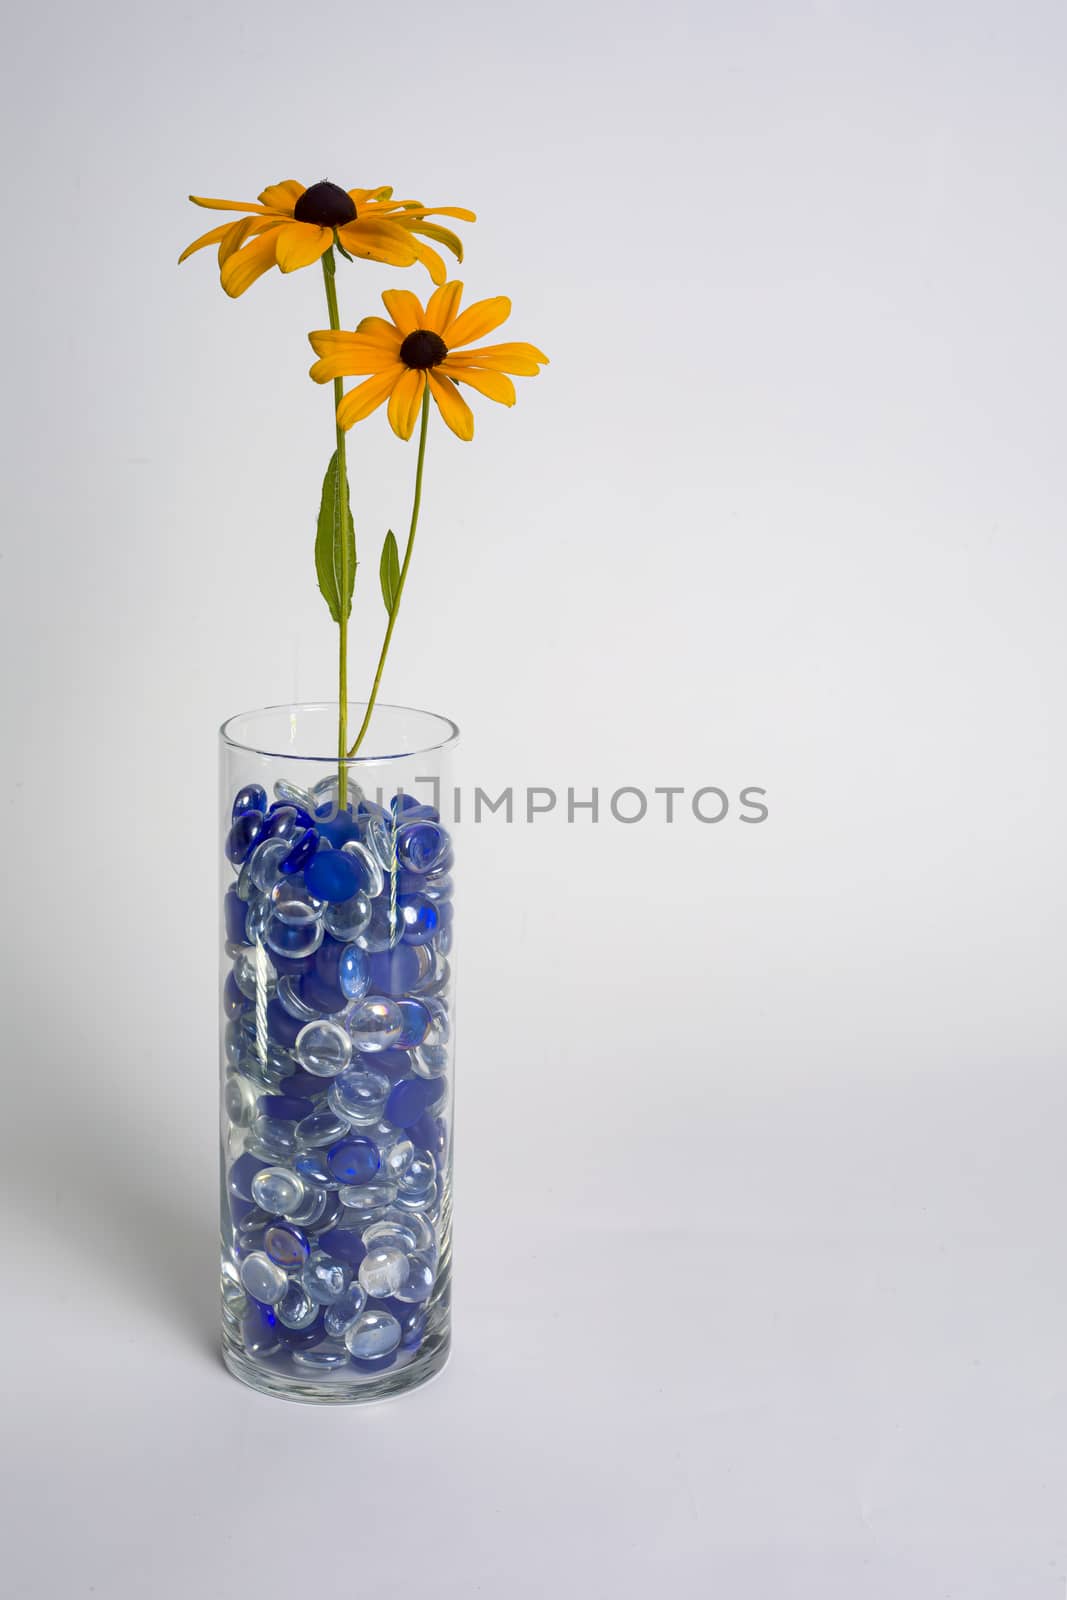 Two Black-eyed Susans in a glass vase filled with blue beads against a white backdrop.